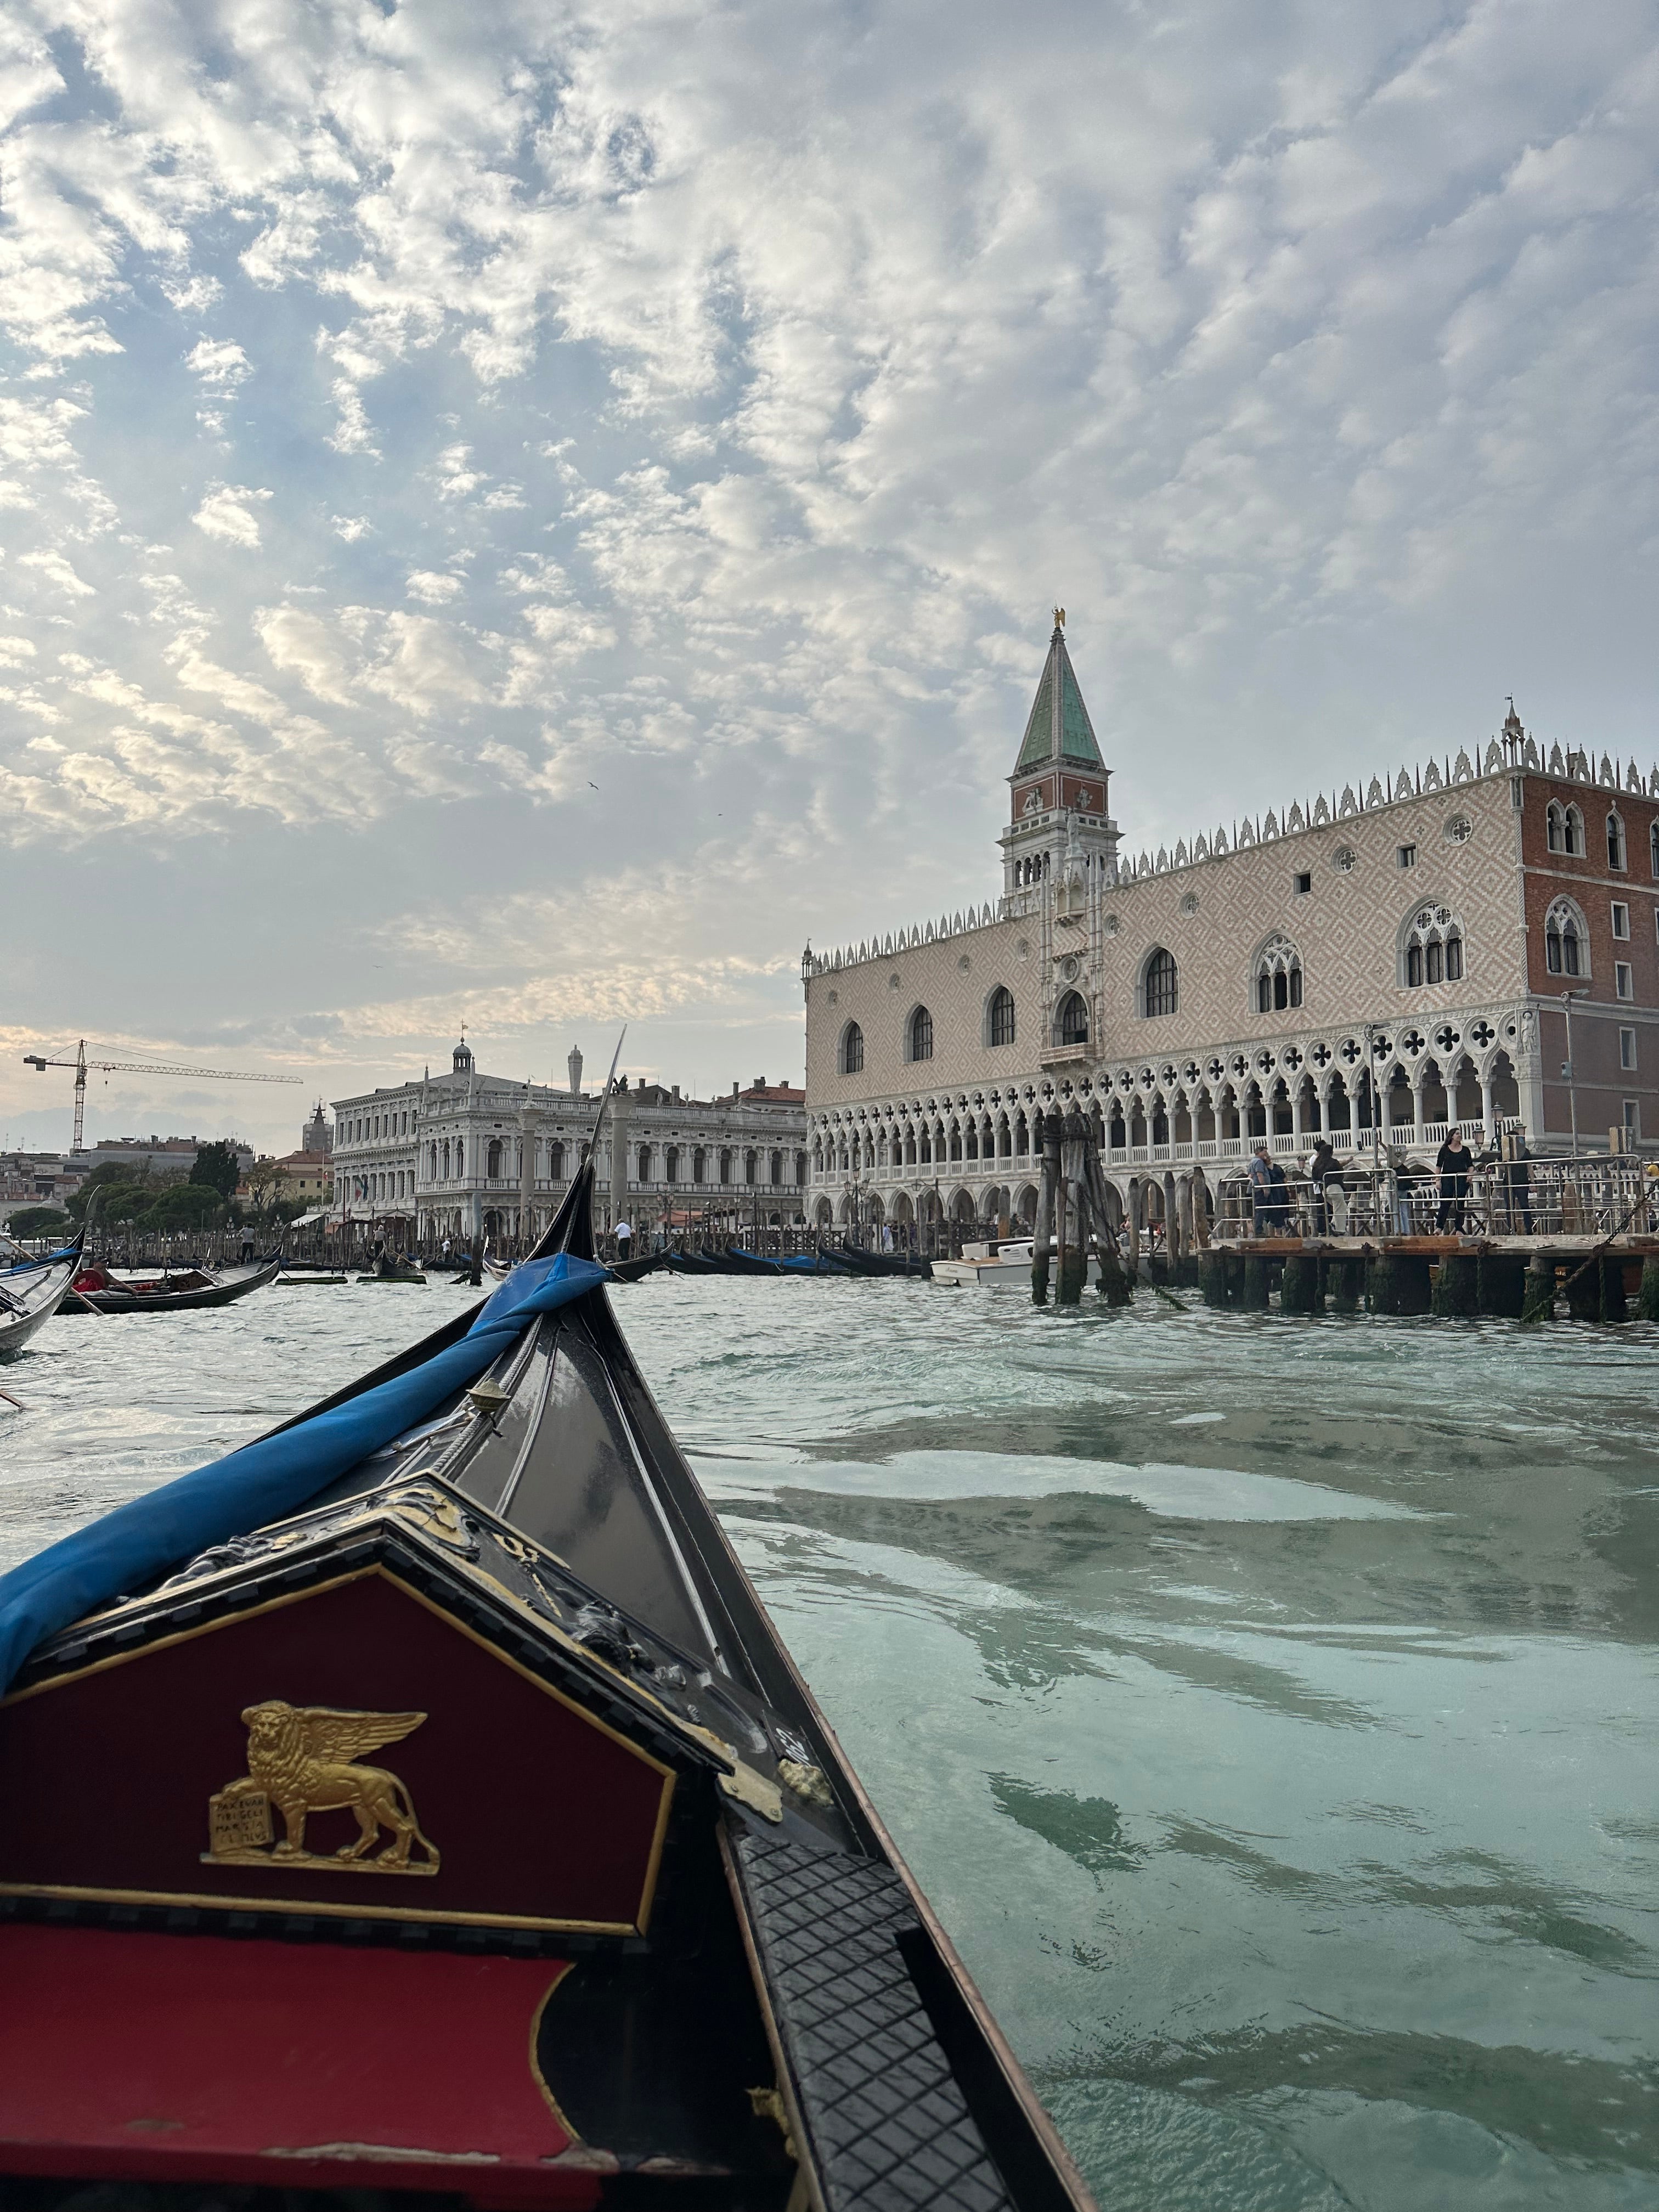 Visit Venice, Italy in 48 hours.